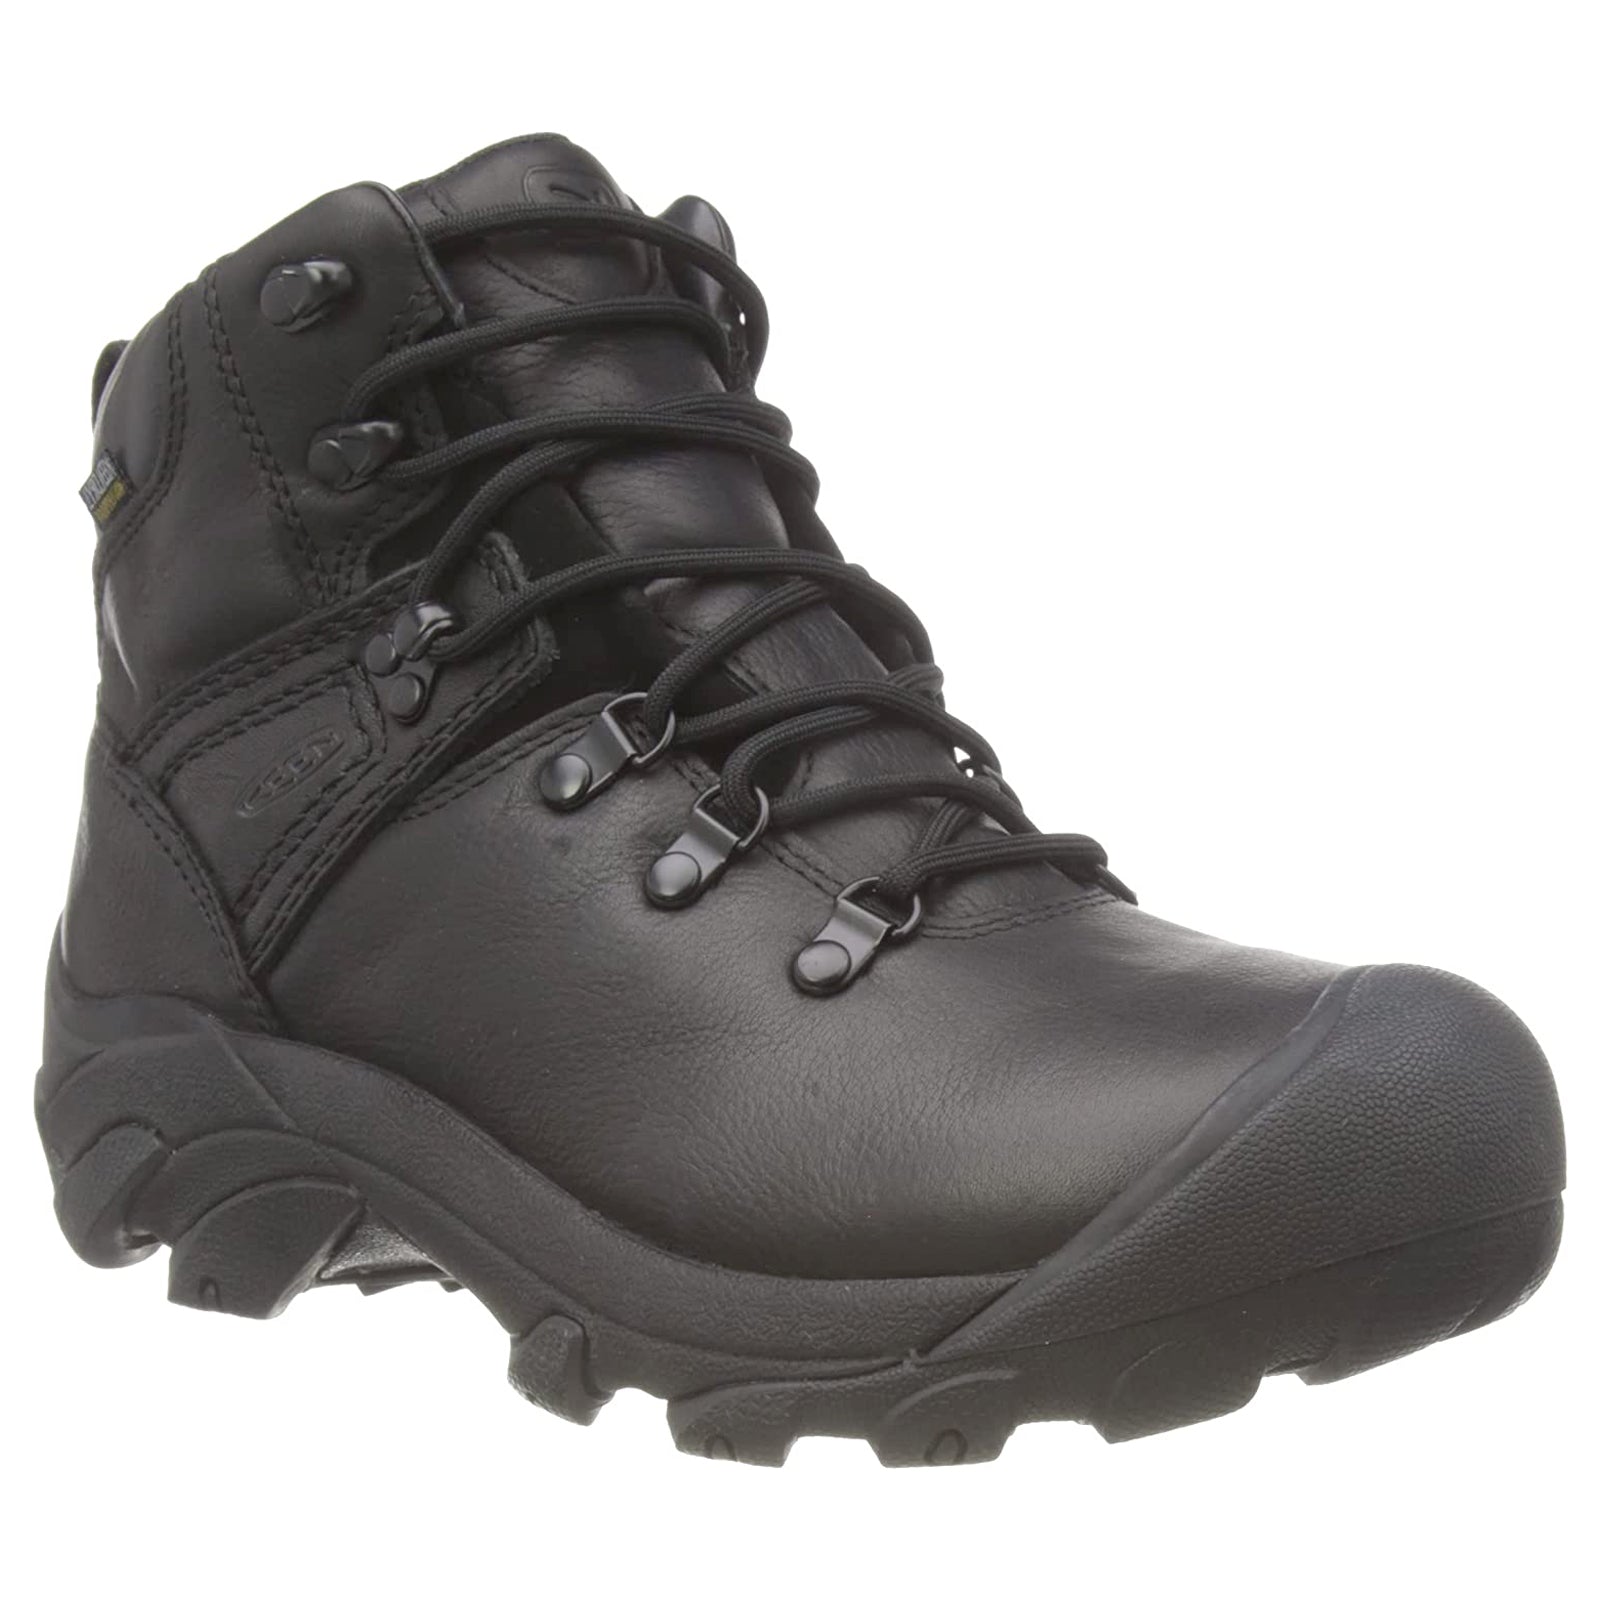 Keen Womens Boots Pyrenees Casual Lace-Up Ankle Hiking Outdoor Leather - UK 7.5